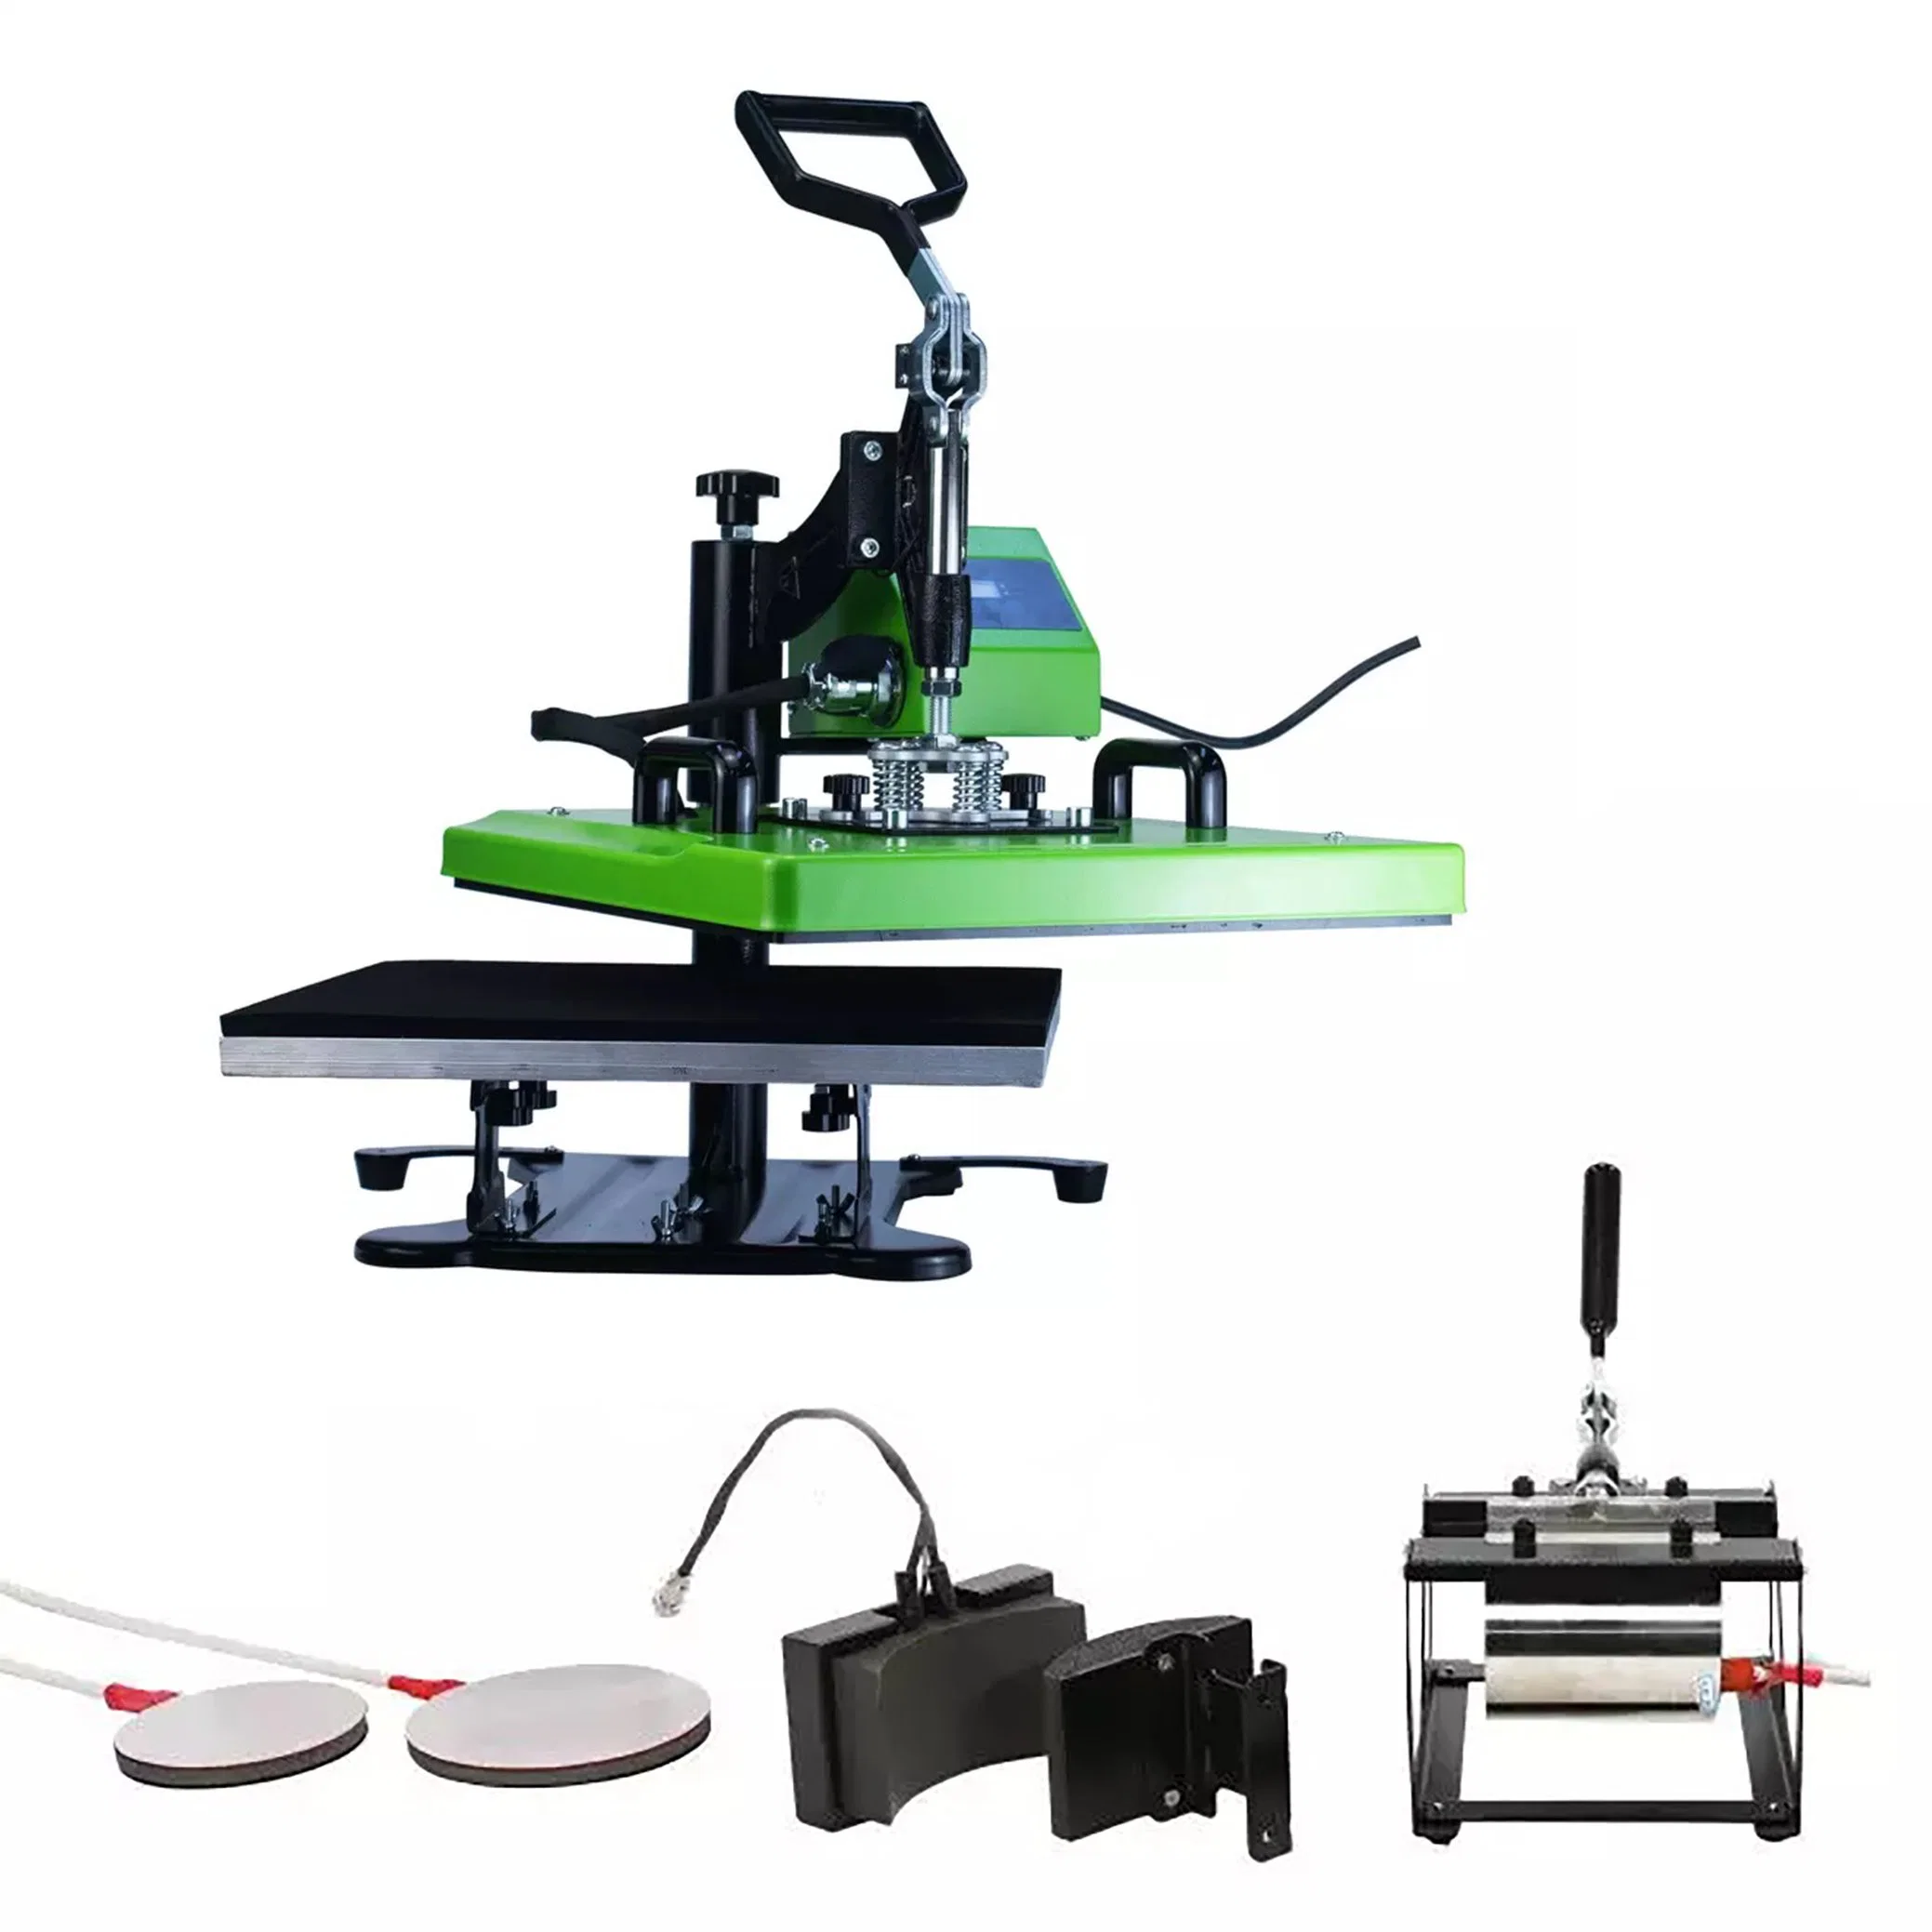 29*38cm 11"*15" Inches Wholesale/Supplier Cheap Price Multi-Functional 5 in 1 Combo Rotary Heat Press Transfer Printing Machine for T-Shirt Mug Plate & Cap